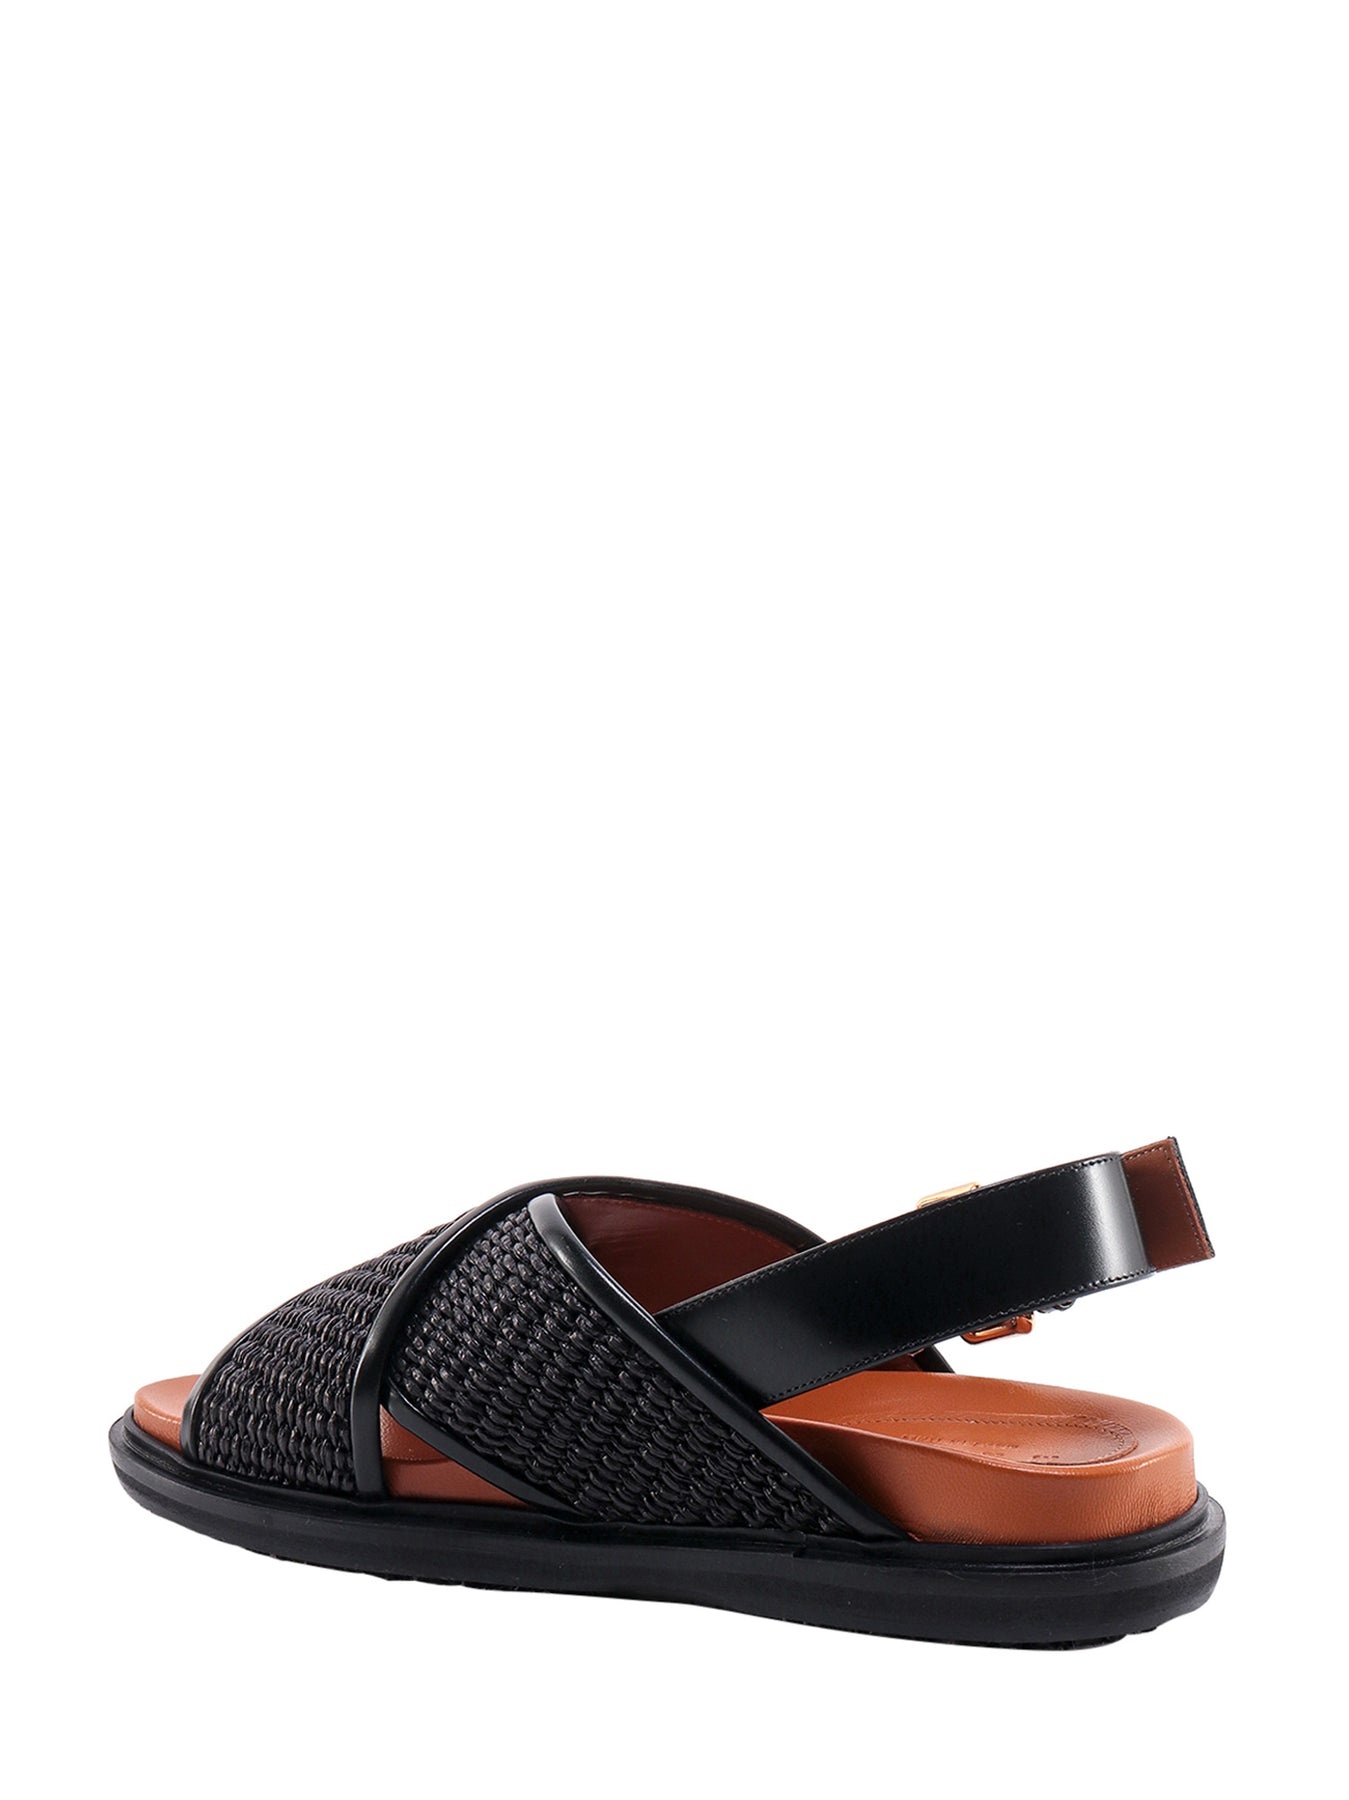 Rafia and leather sandals - 3